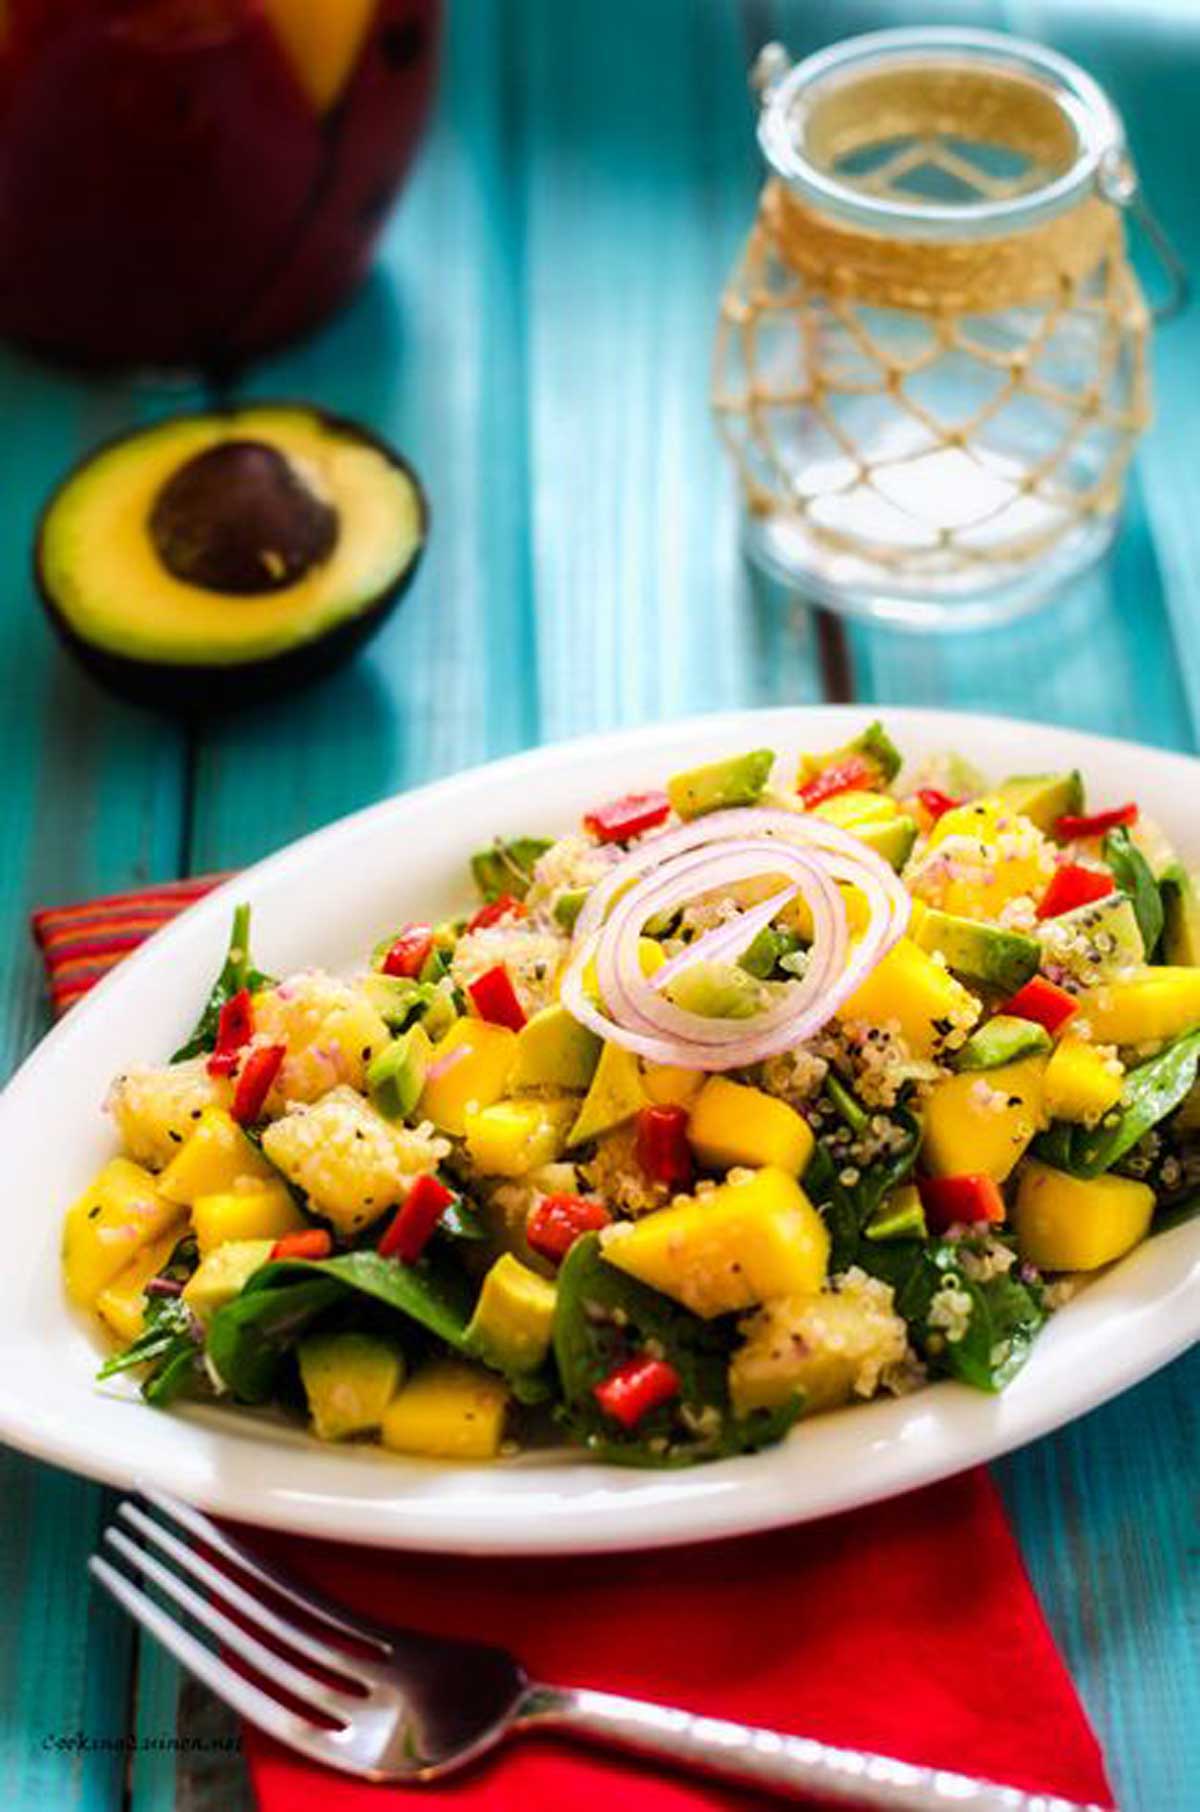 Photo of a platter of Avocado Mango Quinoa Salad garnished with a quick pickled onion.